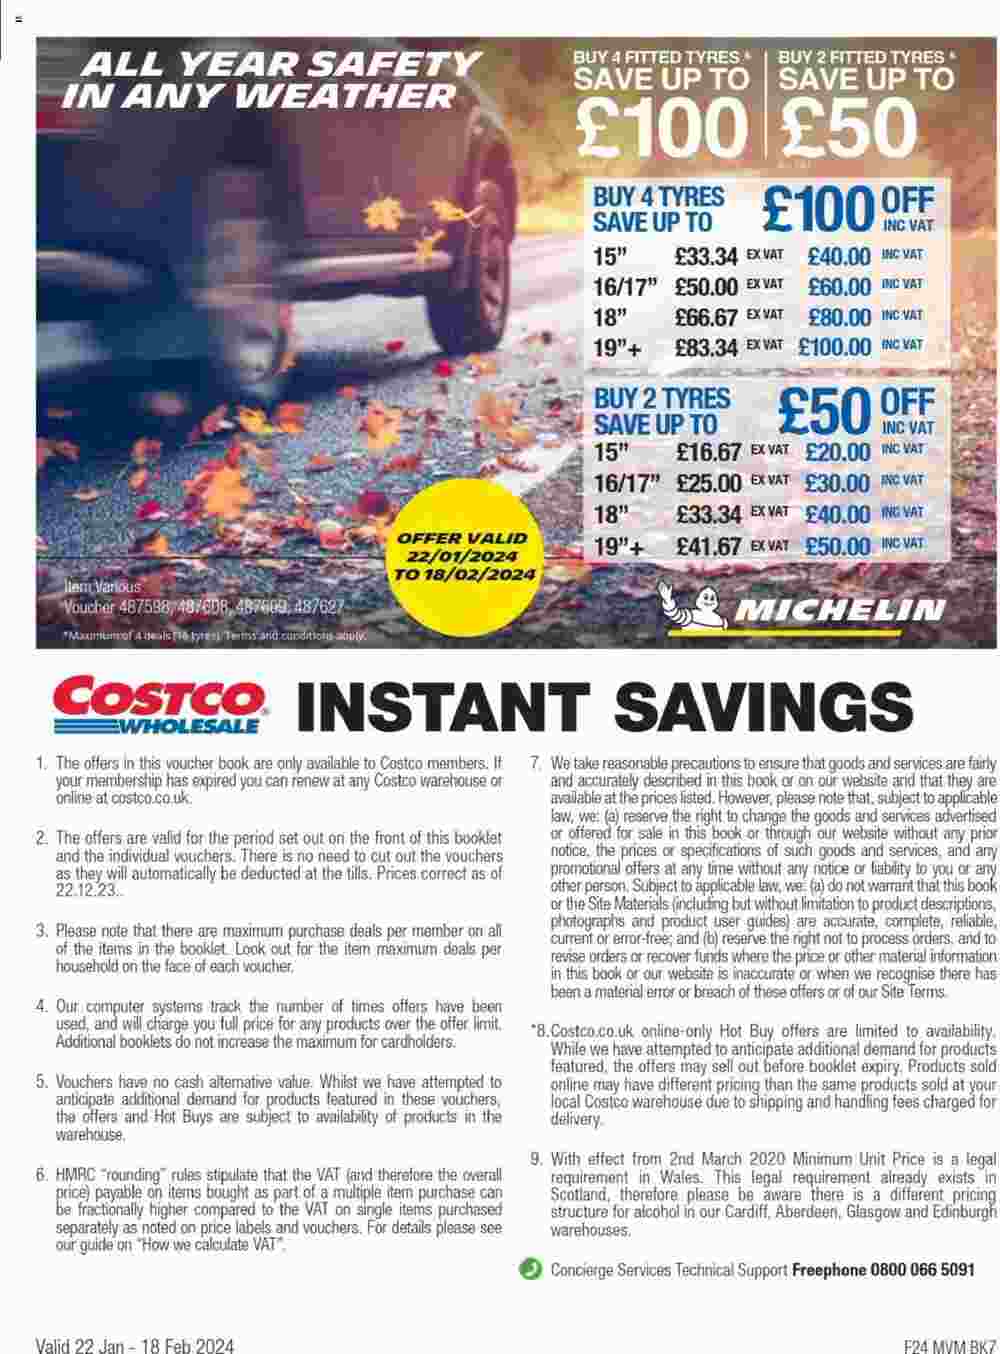 Costco offers valid from 22/01/2024 - Page 24.